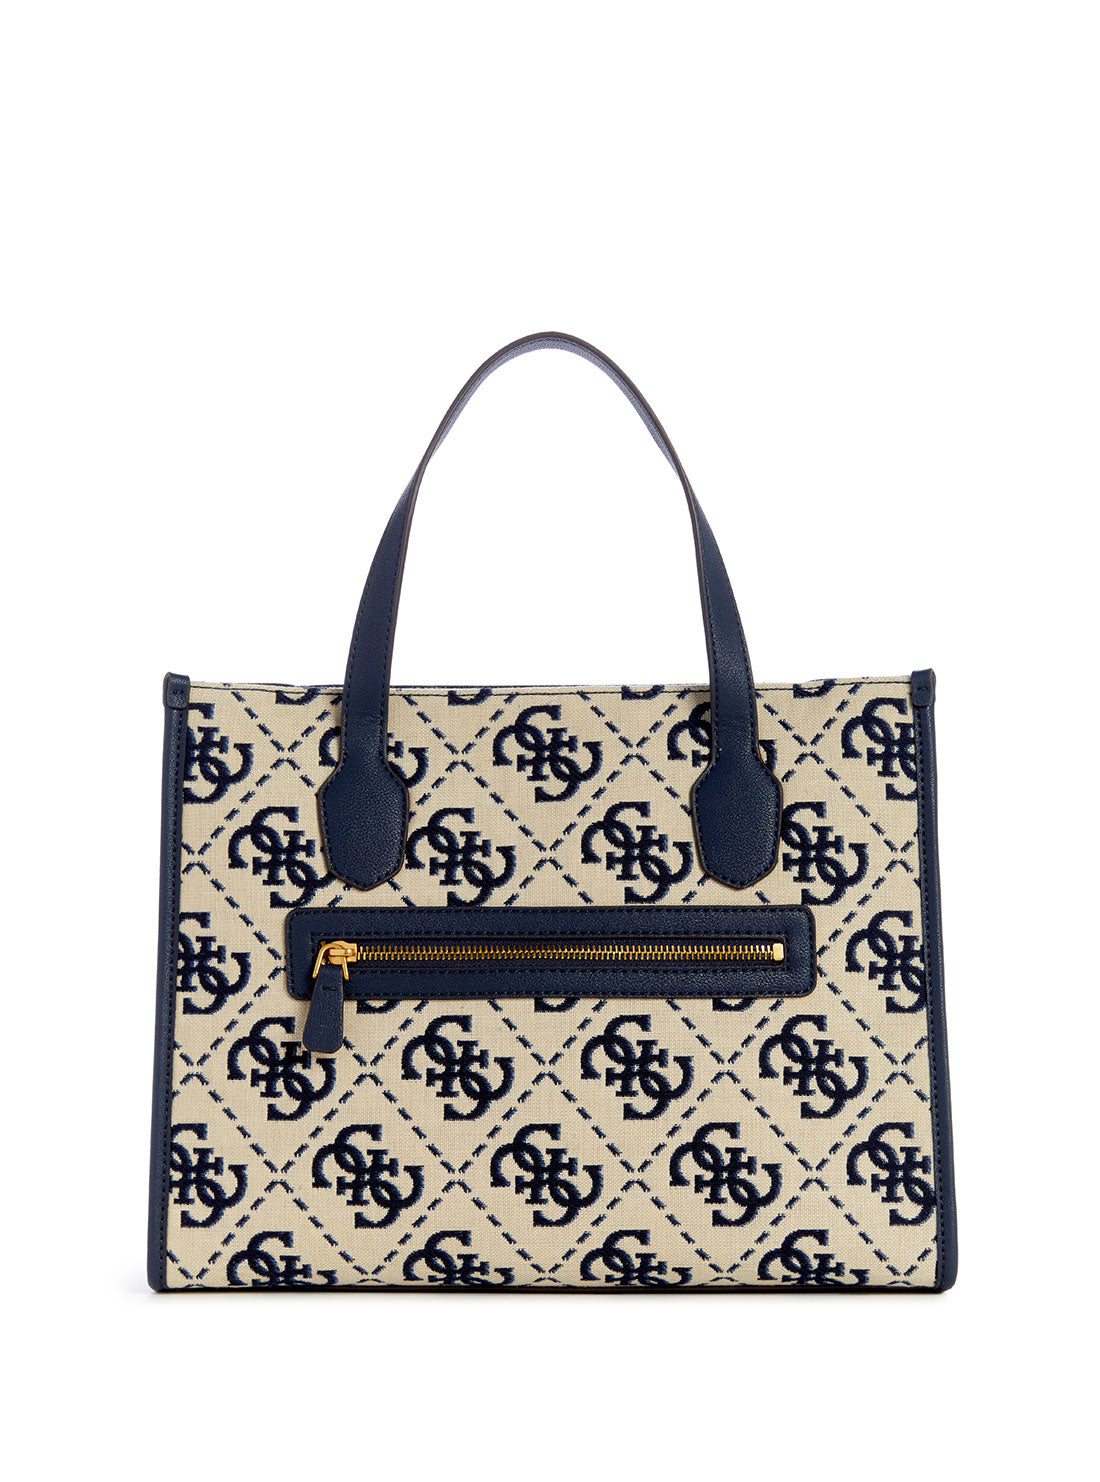 GUESS Blue Logo Izzy Compartment Tote Bag back view